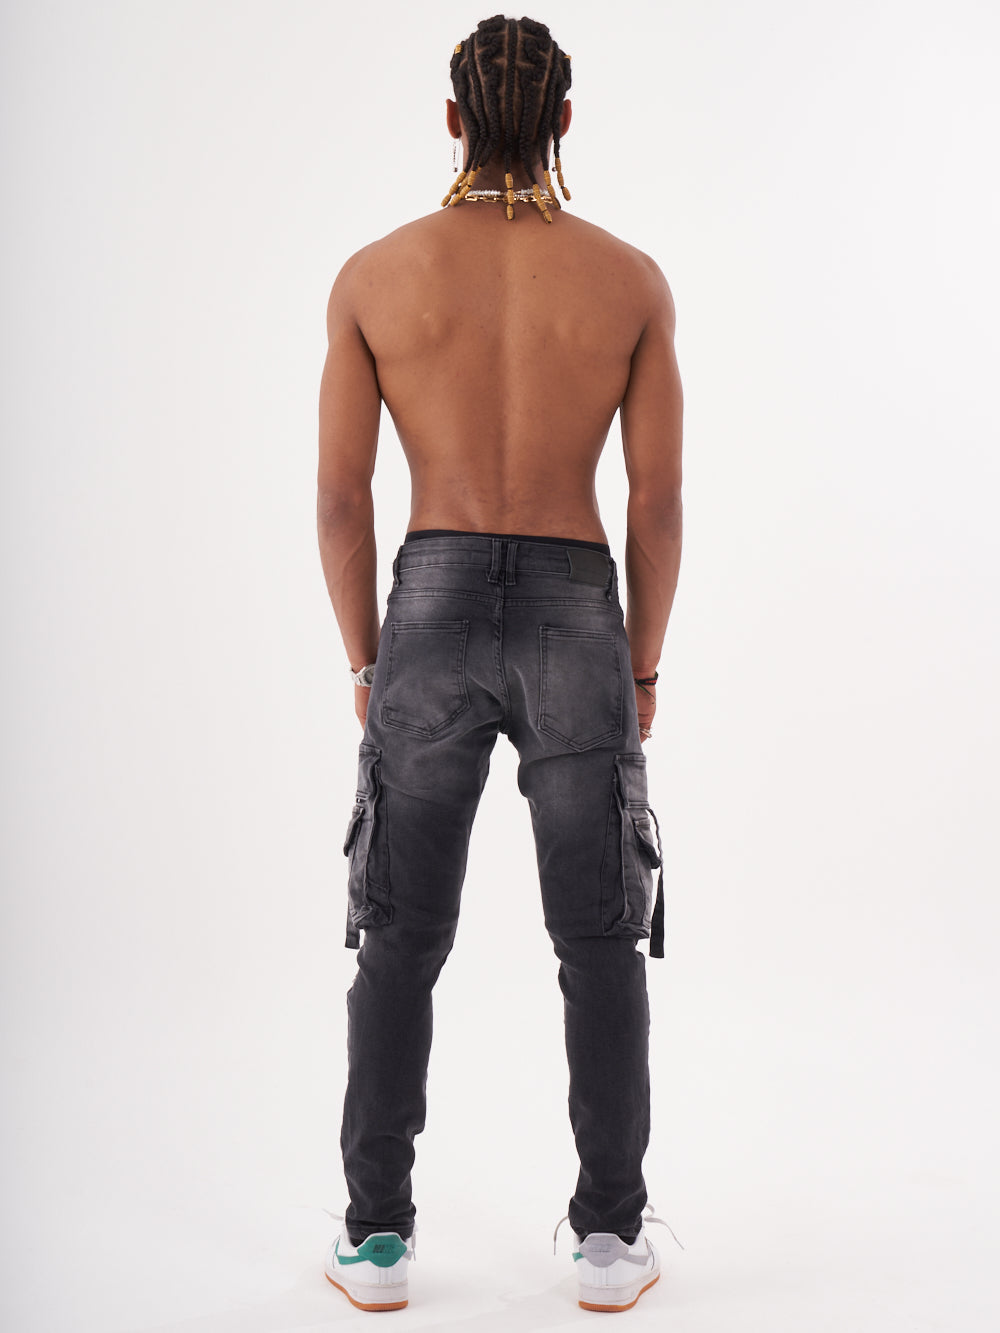 The back view of a man wearing black denim HIPSTER cargo pants.